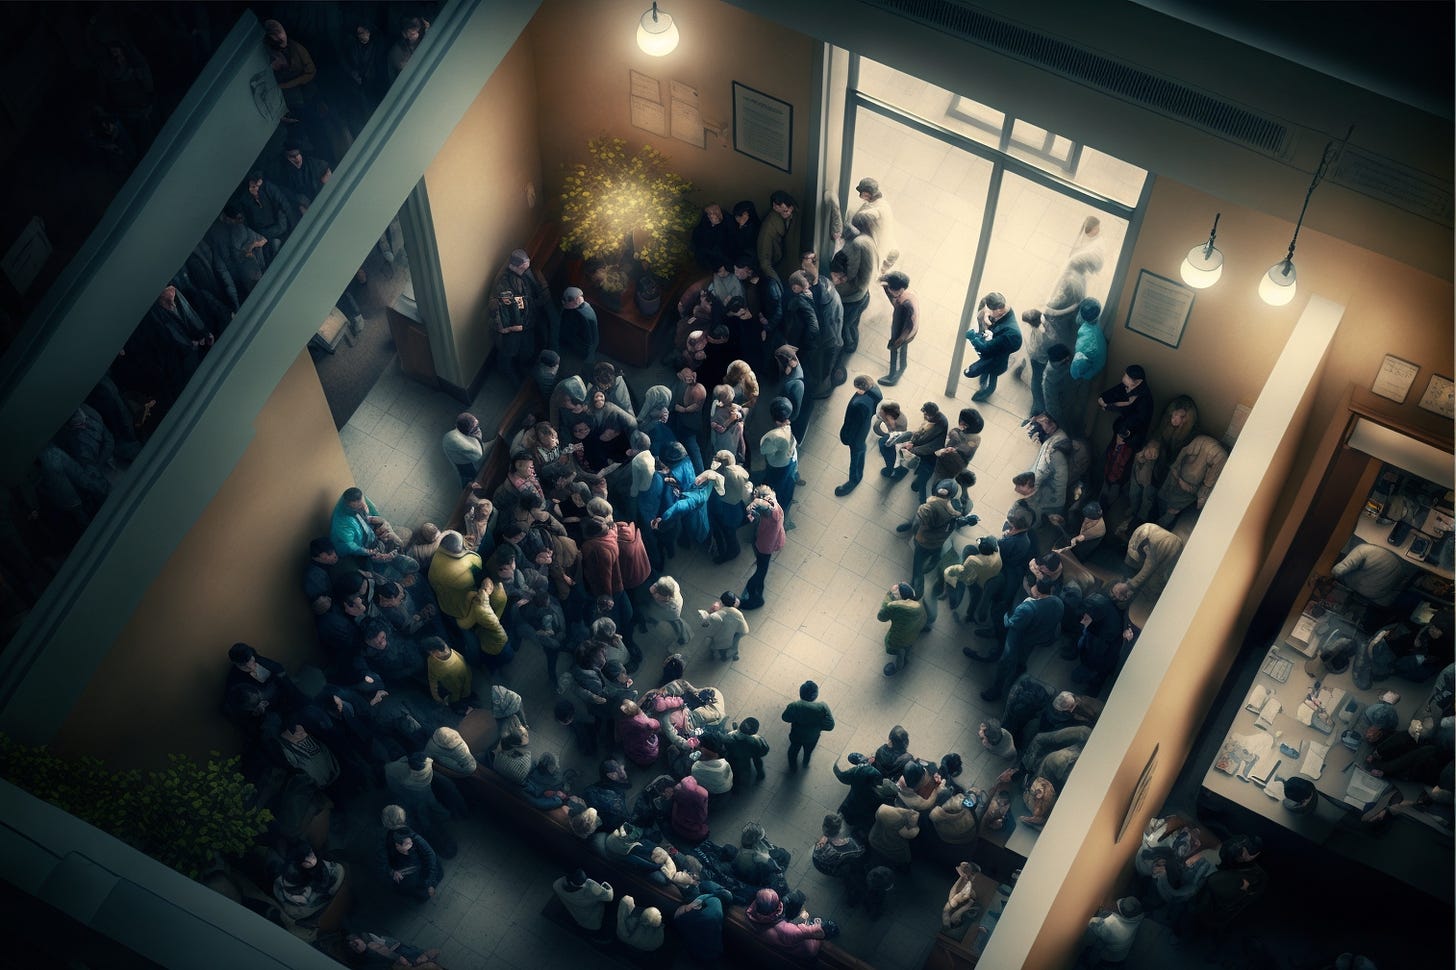 A Midjourney rendered image using the prompt crowded hospital waiting room viewed from above with moody lighting.